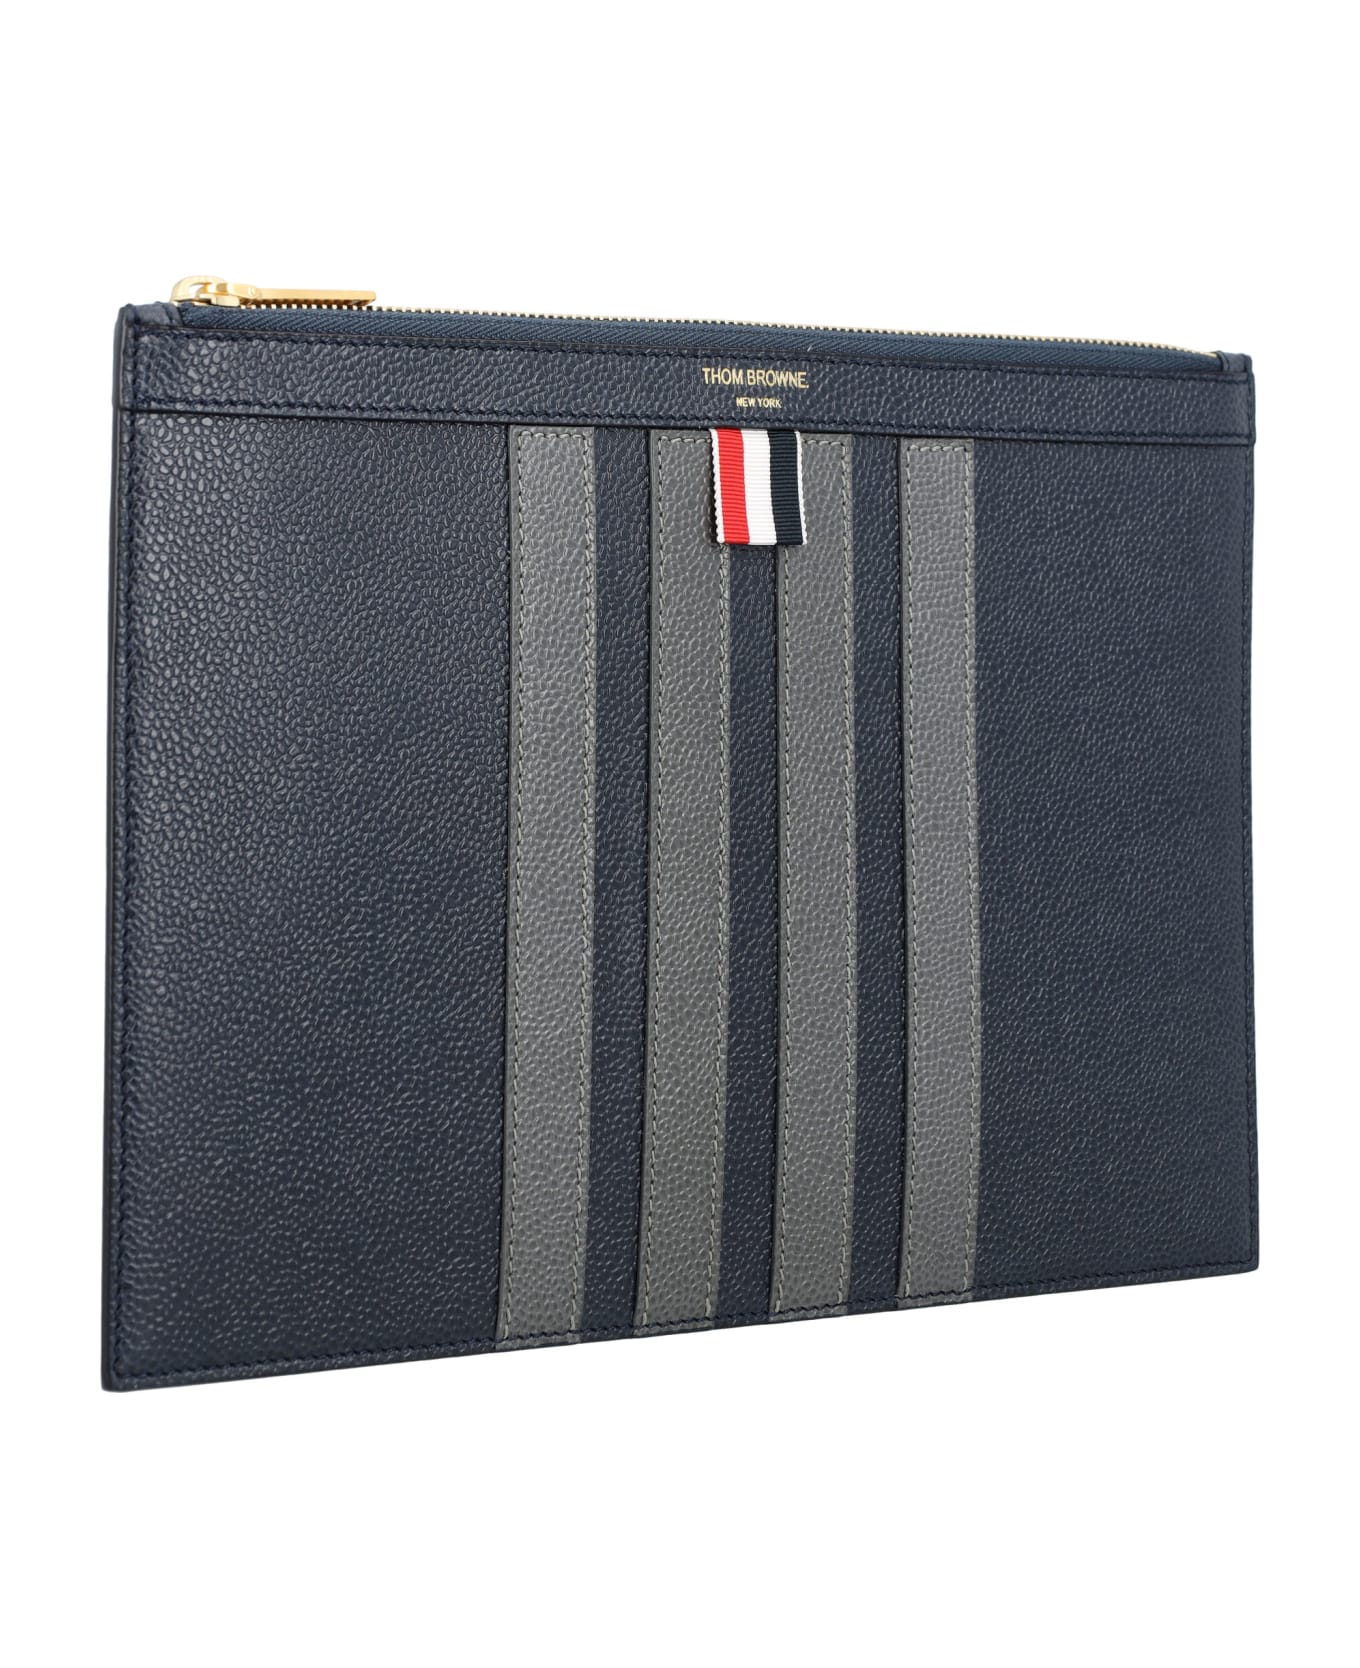 Thom Browne Pebble Grain Leather 4 Bar Small Document Holder - Blue